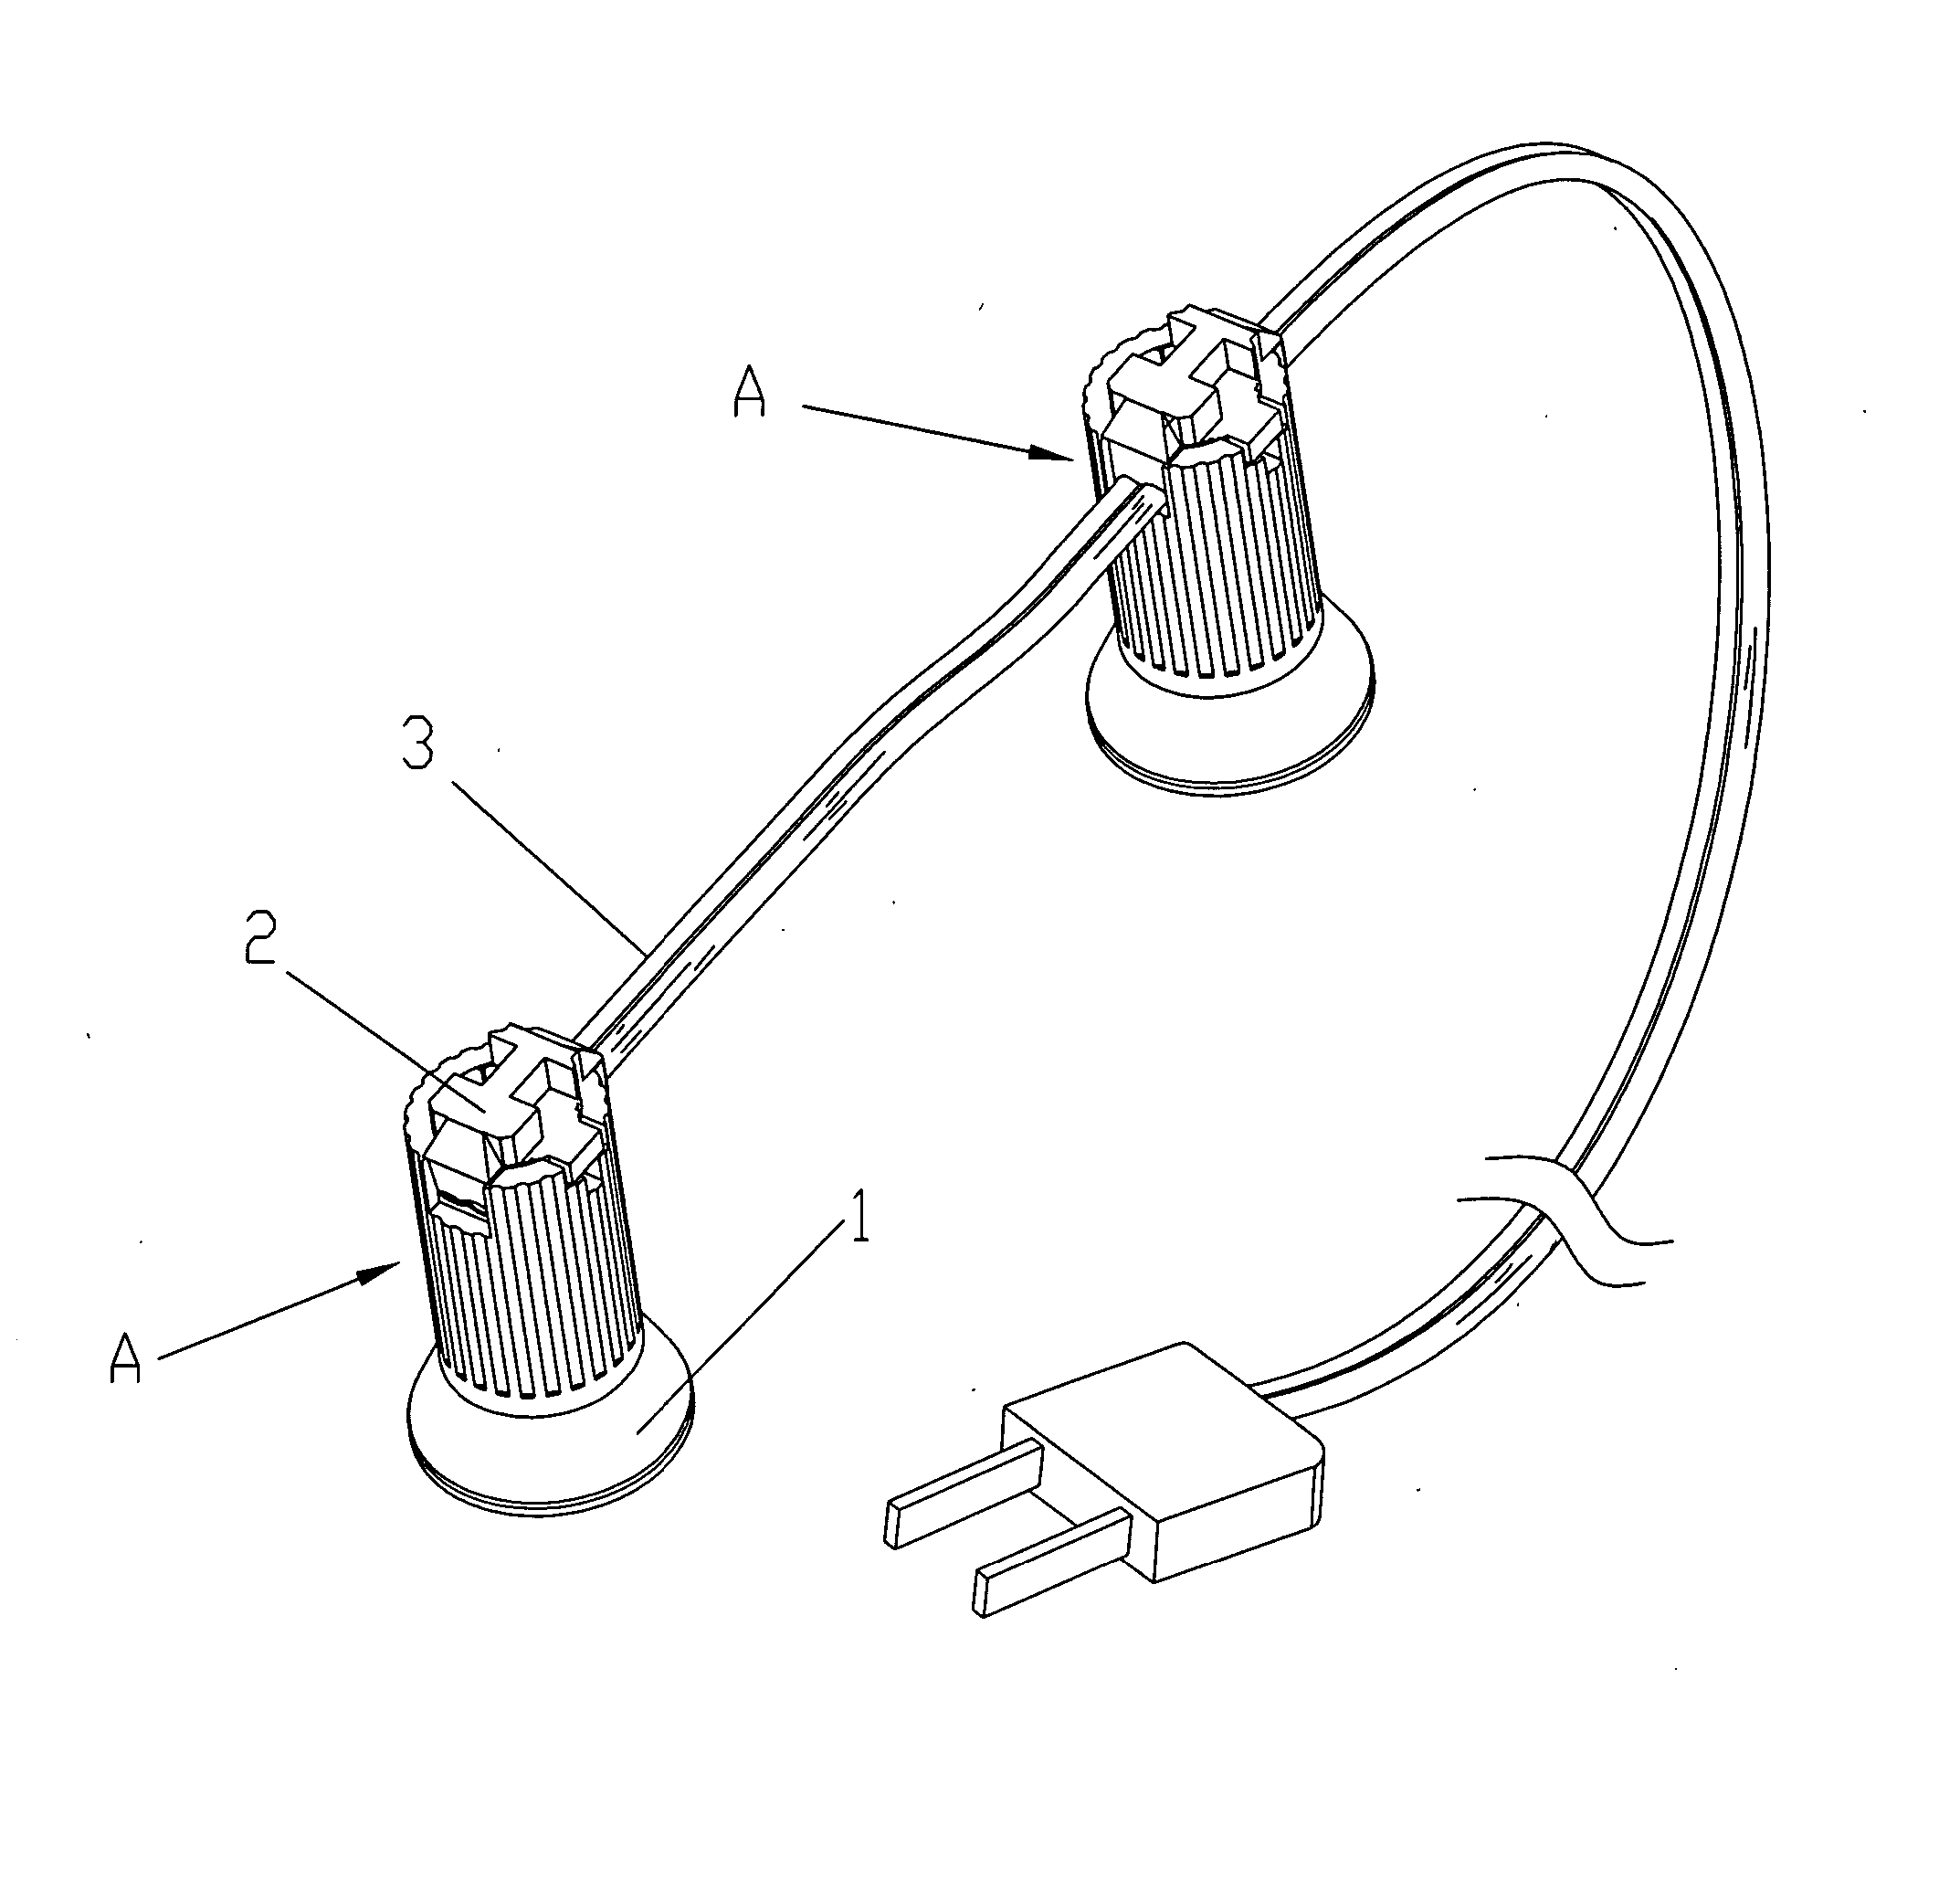 String lamp assembly